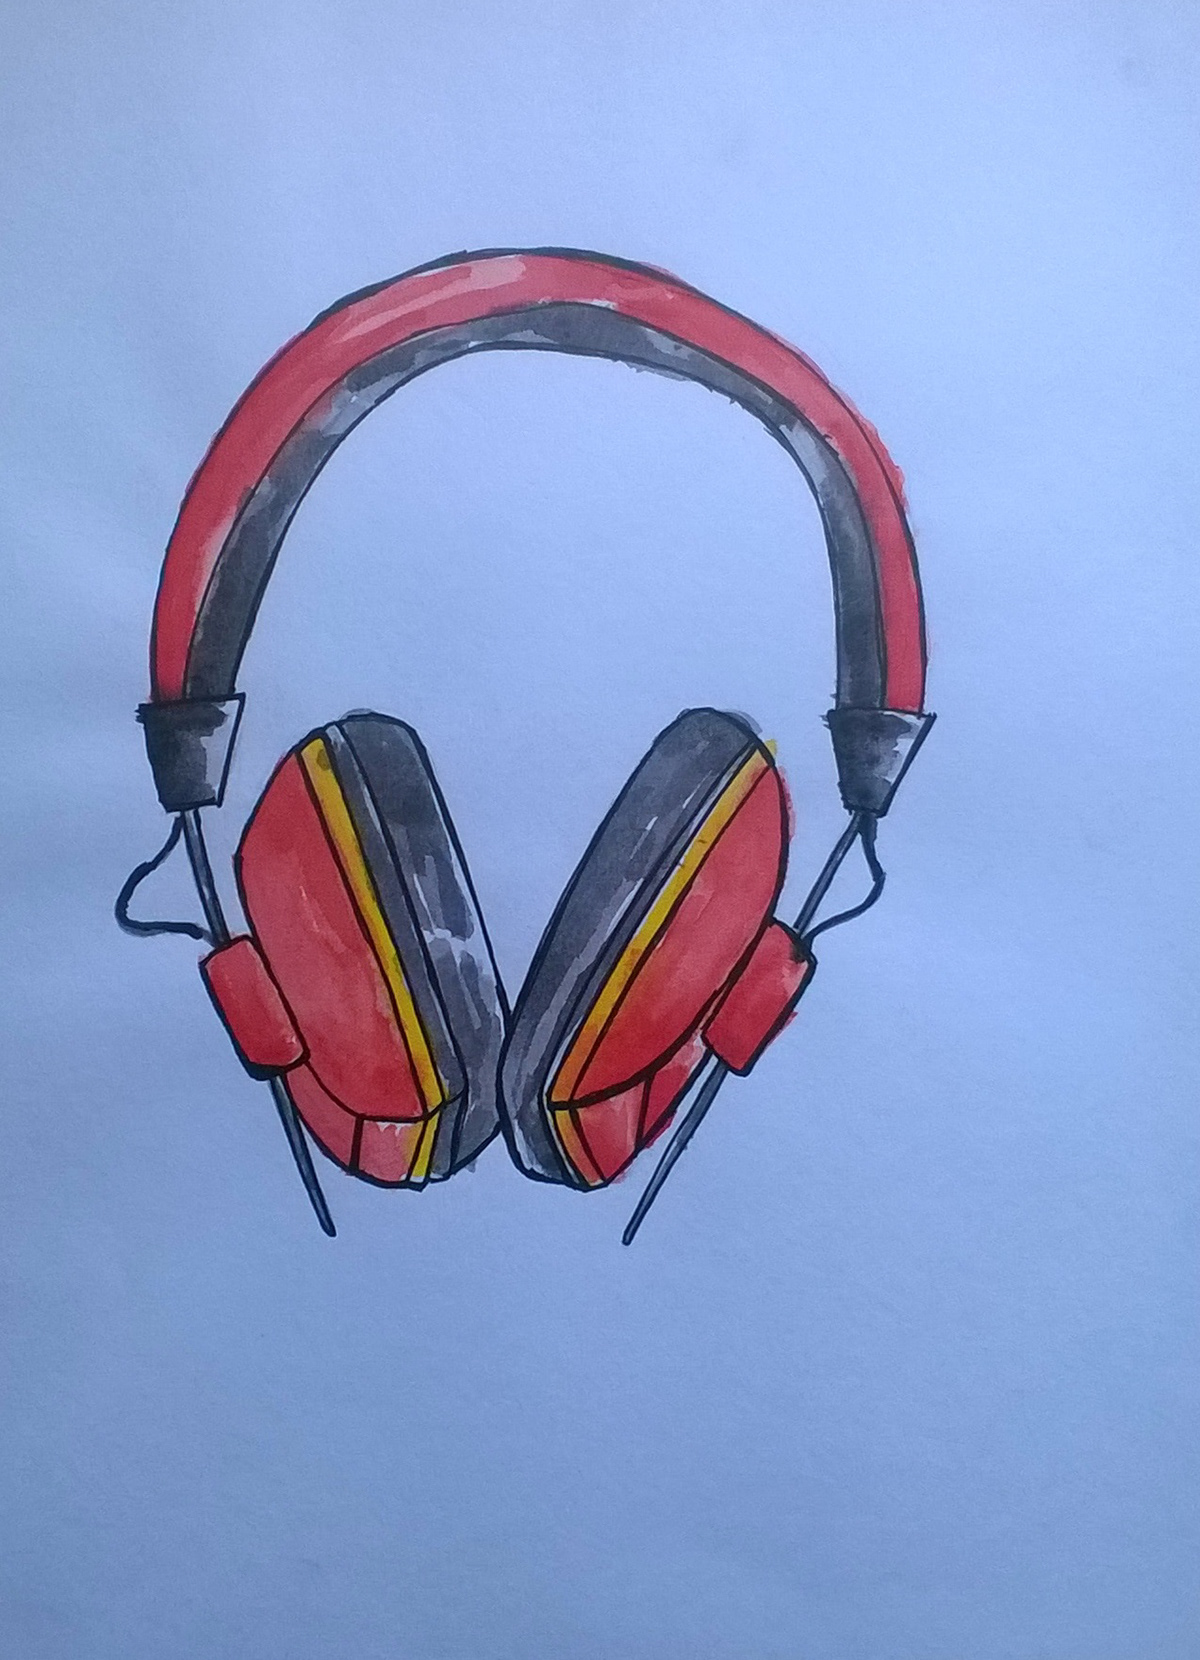 headphone headphones Budweiser red black charcoal watercolor ecoline colors color